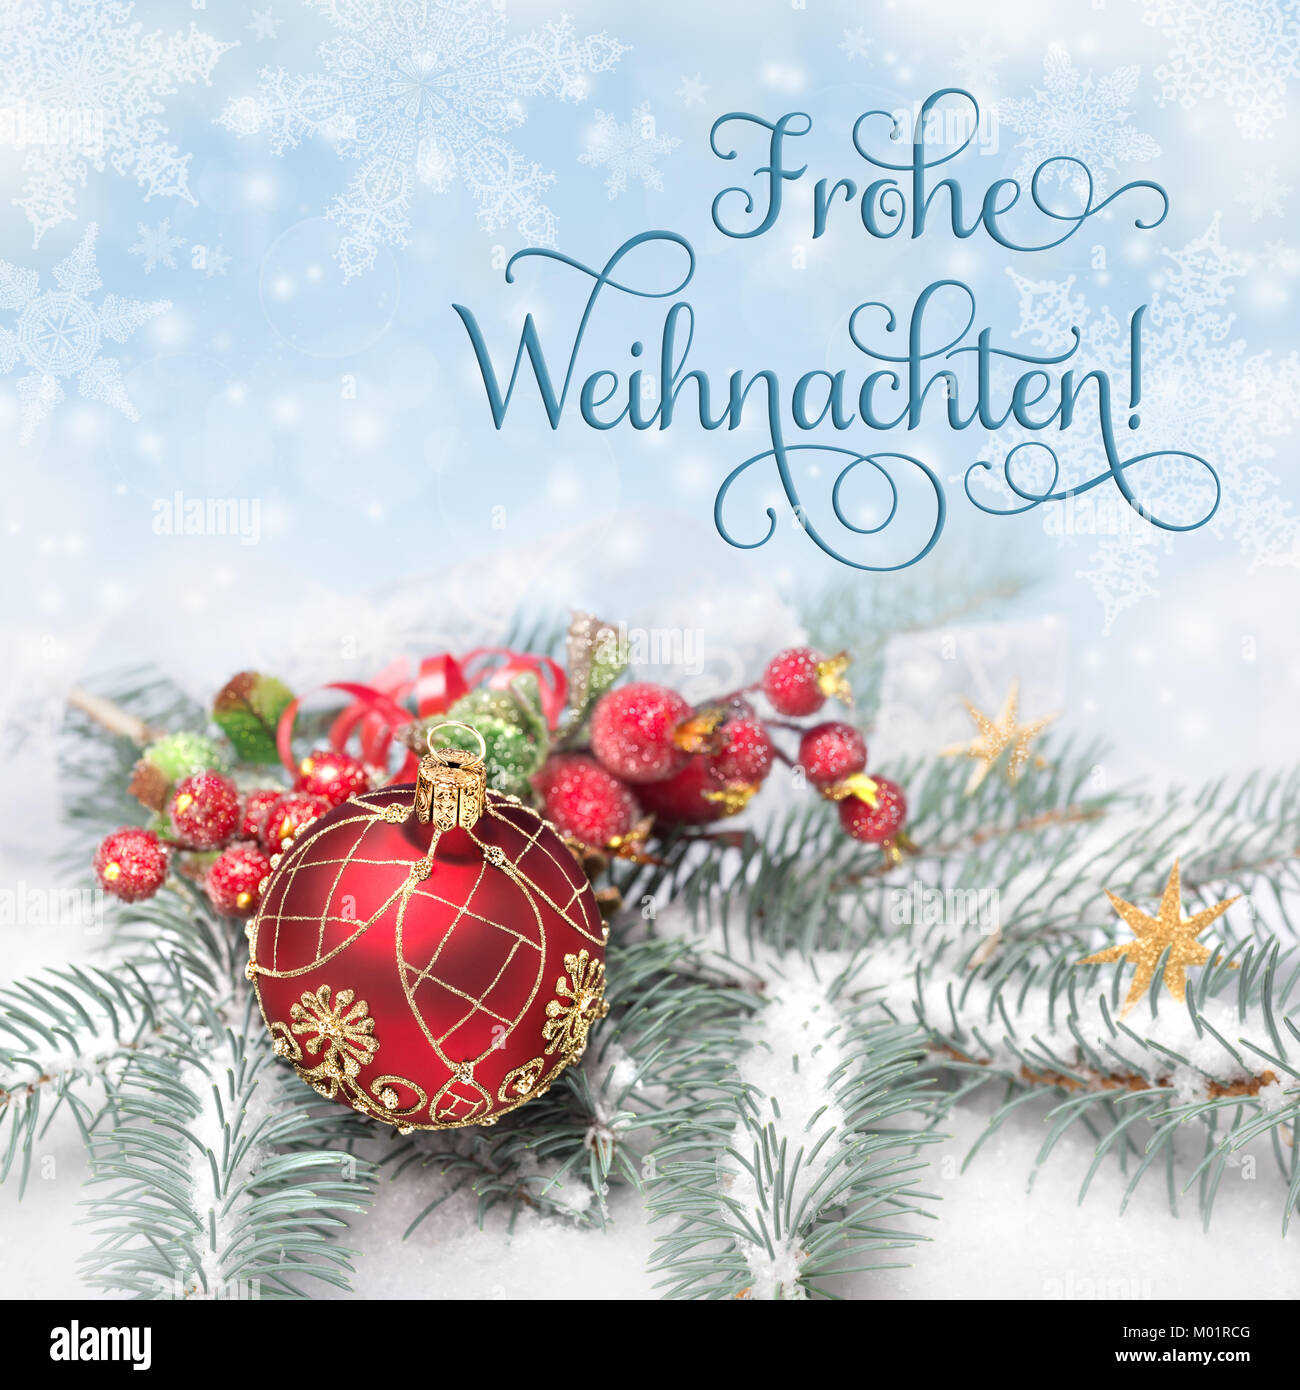 Red Christmas decorations on neutral winter background, greeting 'Frohe Weihnachten', or 'Merry Christmas' in German Stock Photo